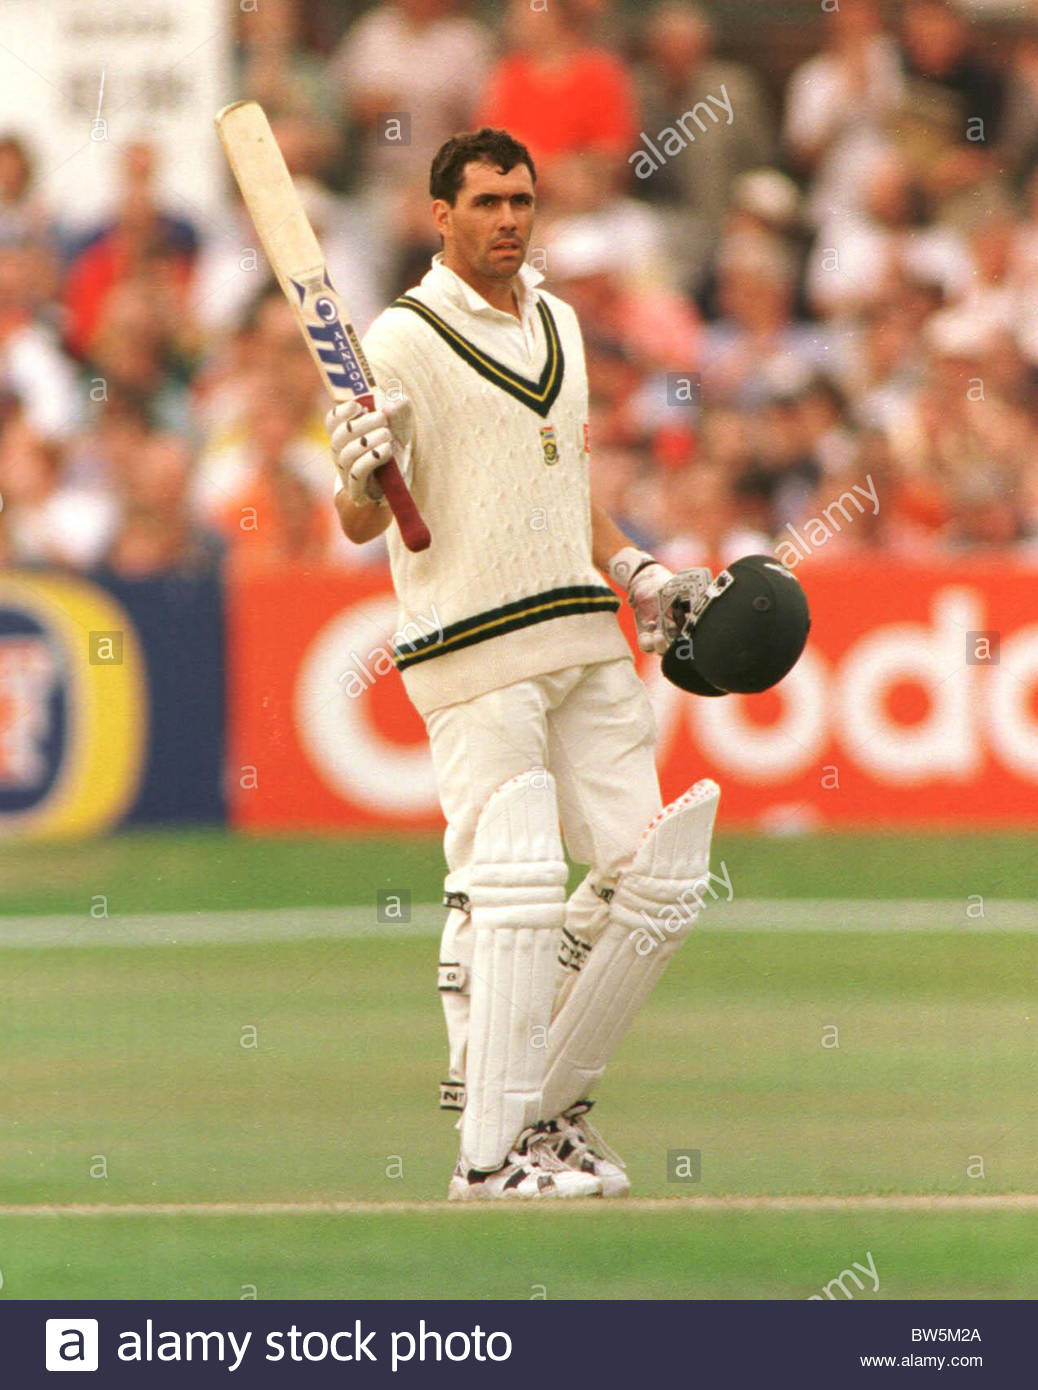 england-vs-south-africa-5th-test-at-headingley-2nd-day-hansie-cronje-BW5M2A.jpg